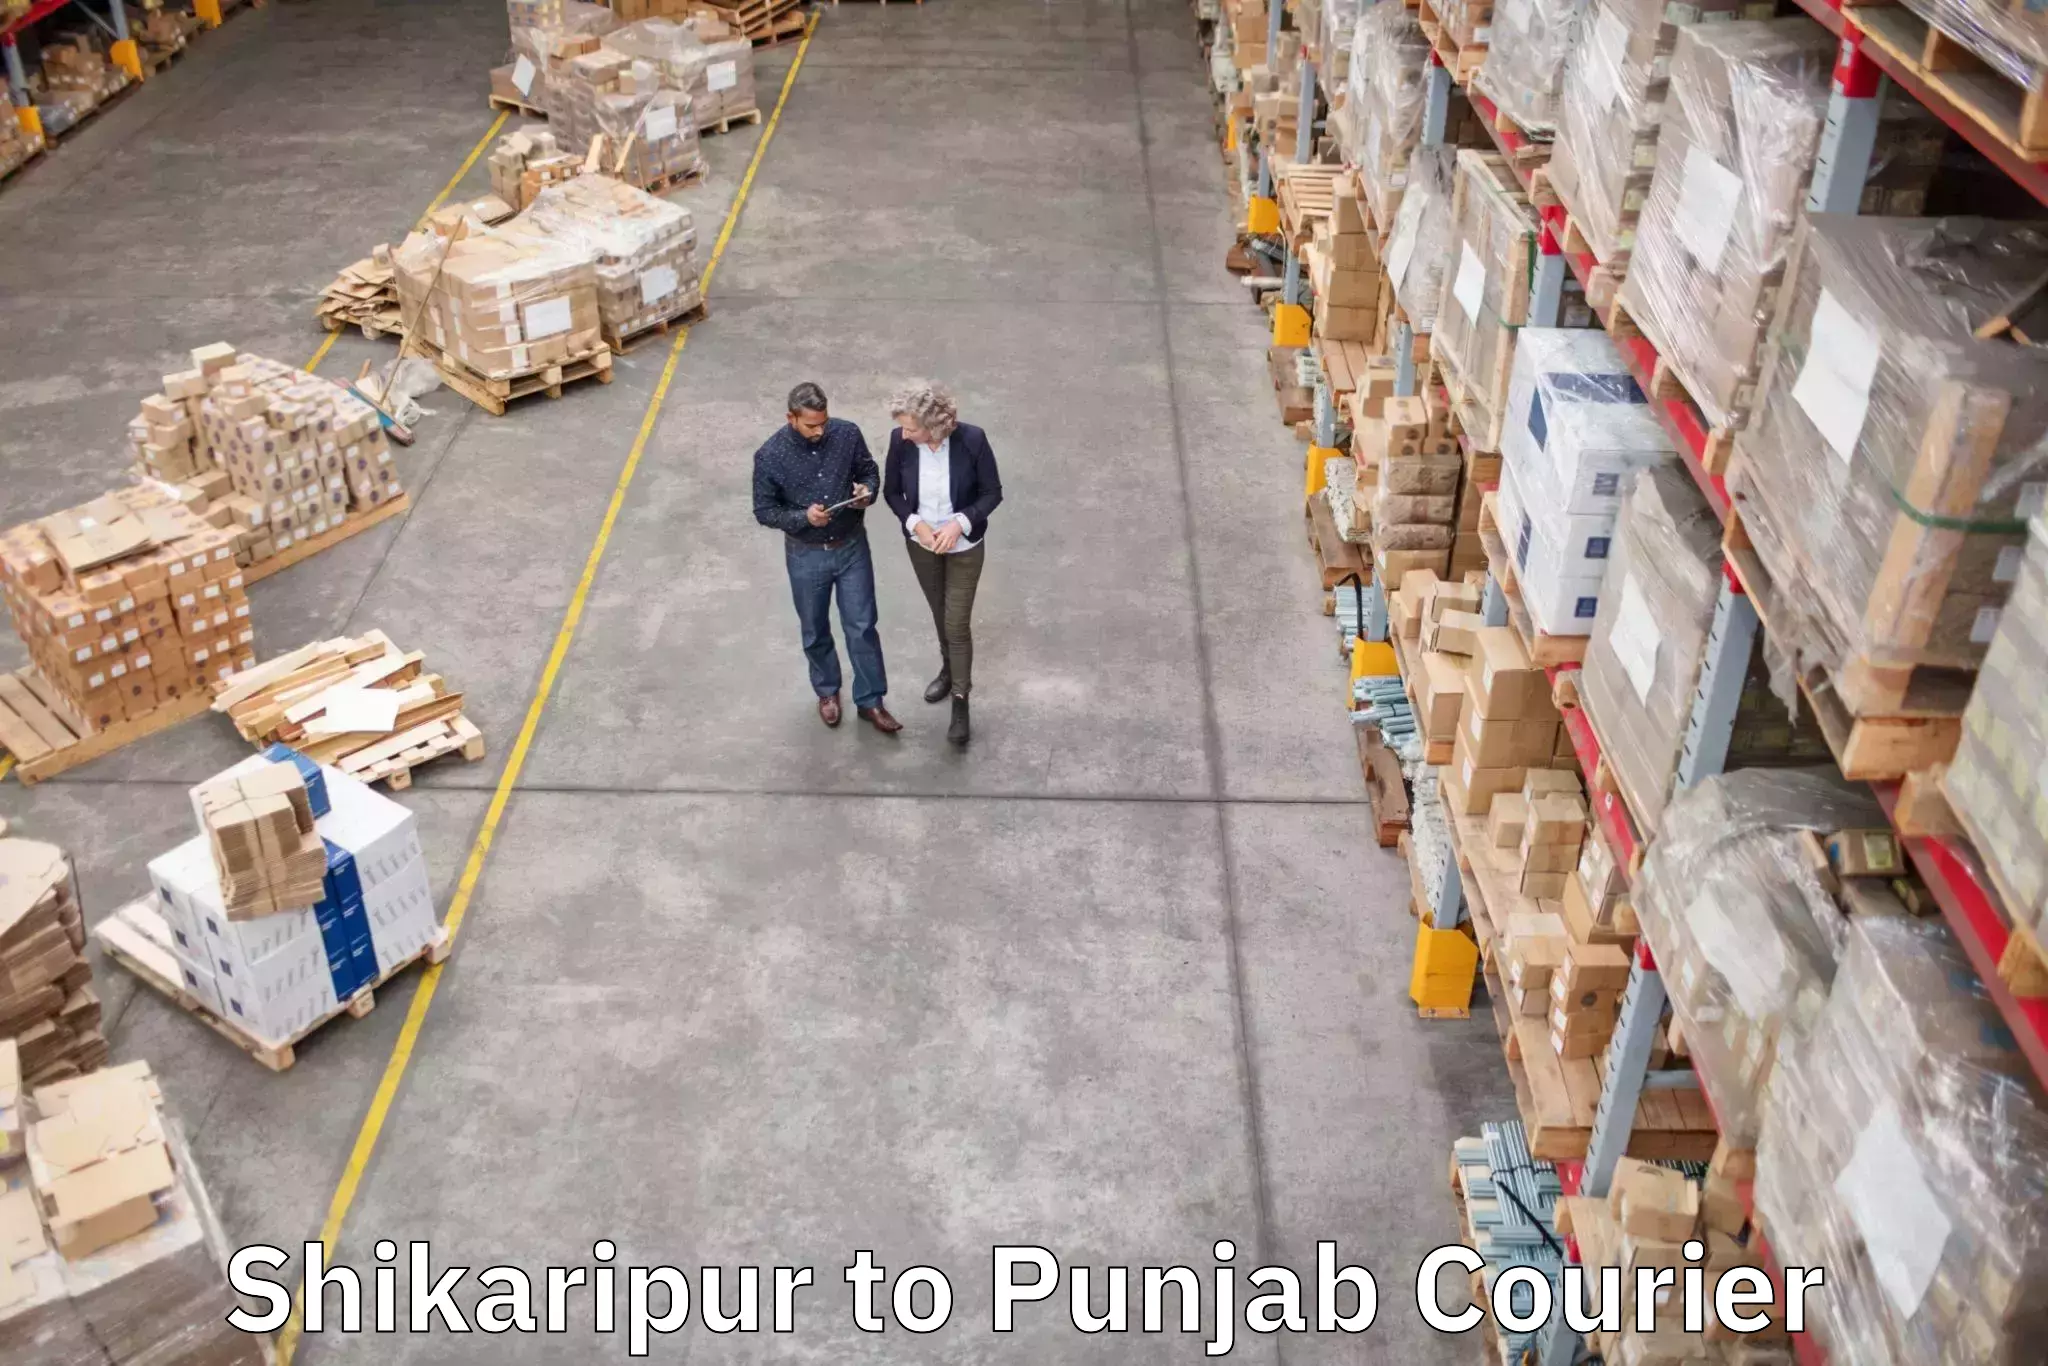 Luggage storage and delivery Shikaripur to Punjab